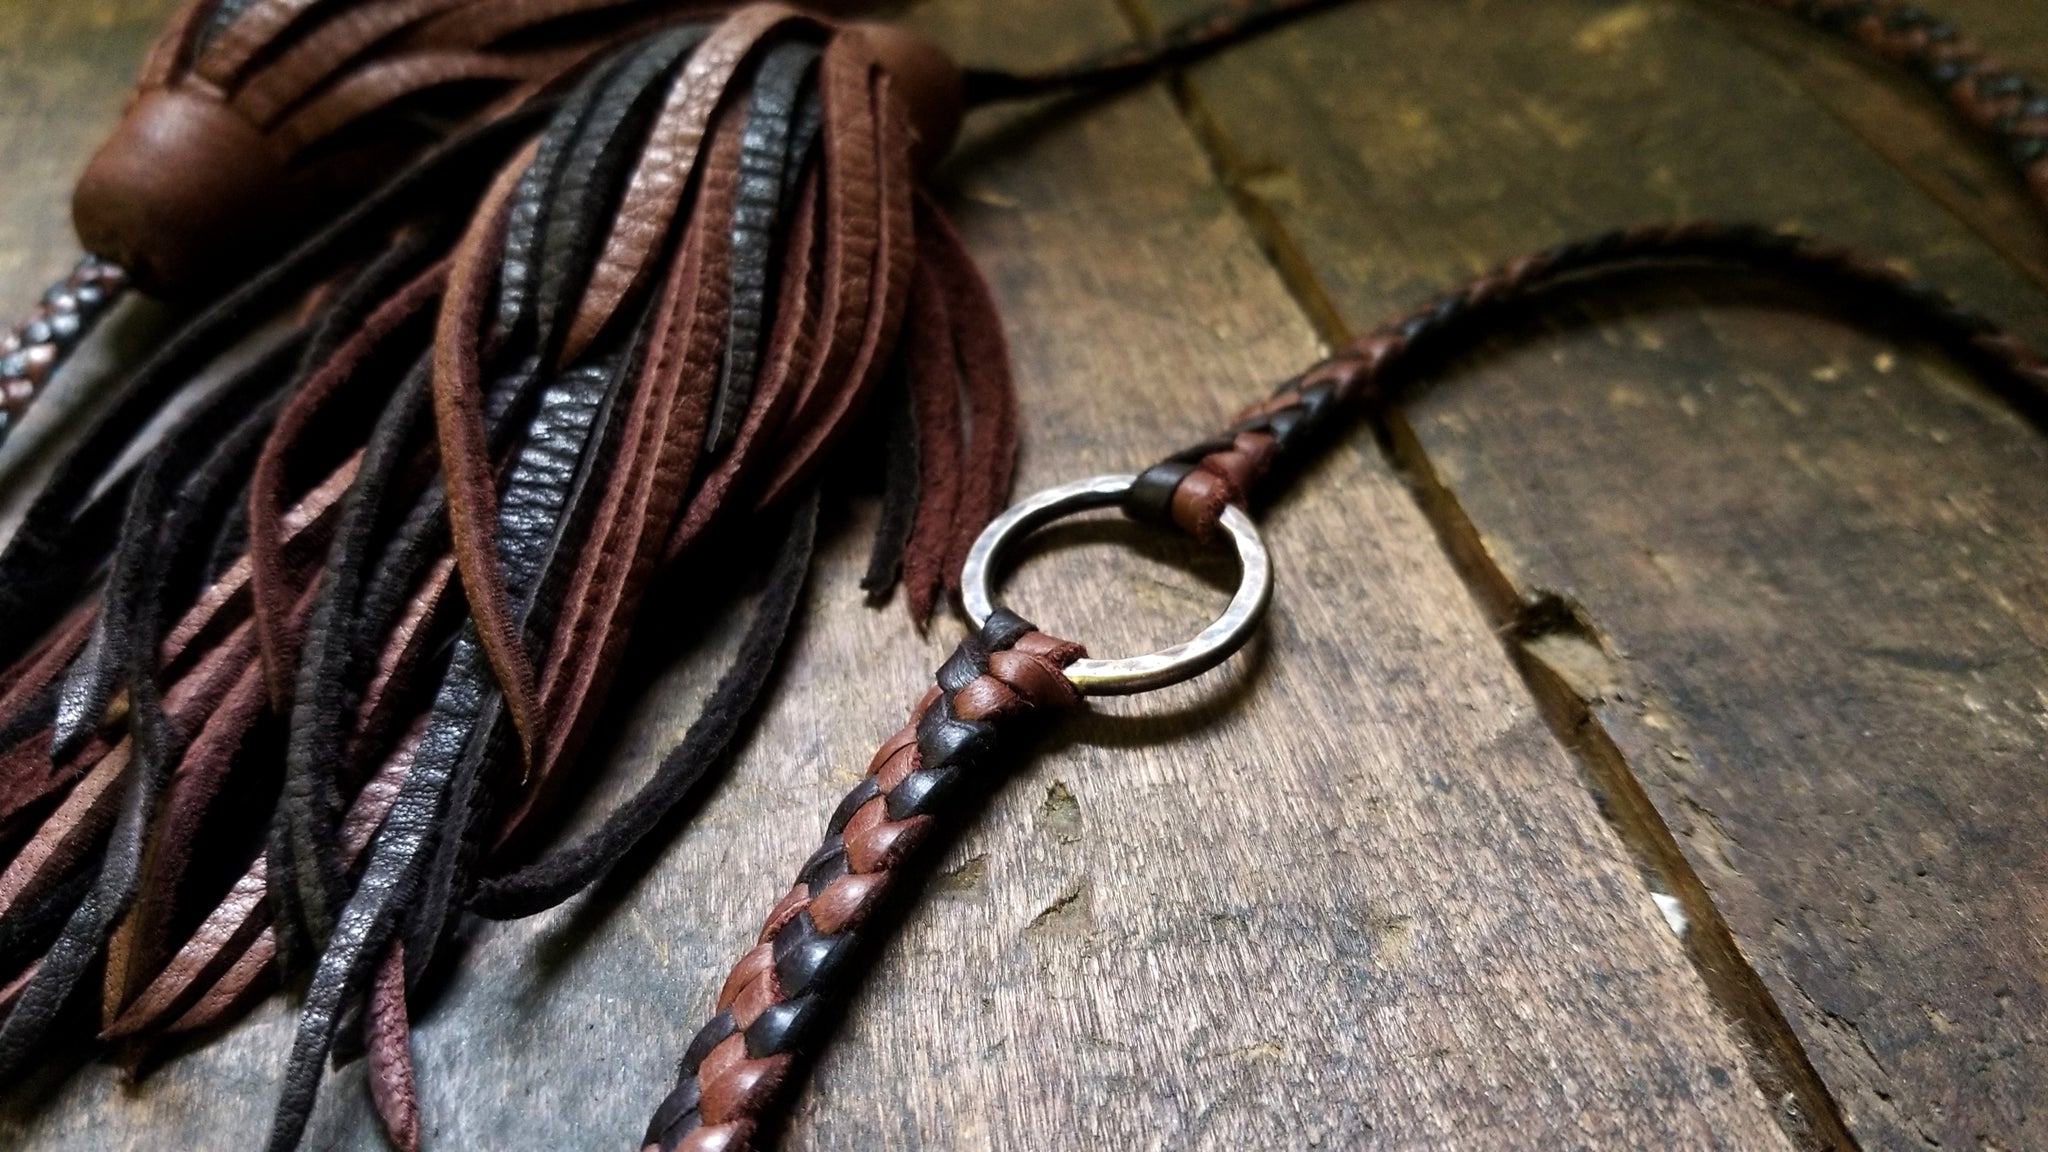 Zyanya Ring Braided Leather Choker Necklace/Wrap Bracelet, chocolate and mahogany eternity necklace with antique nickel ring